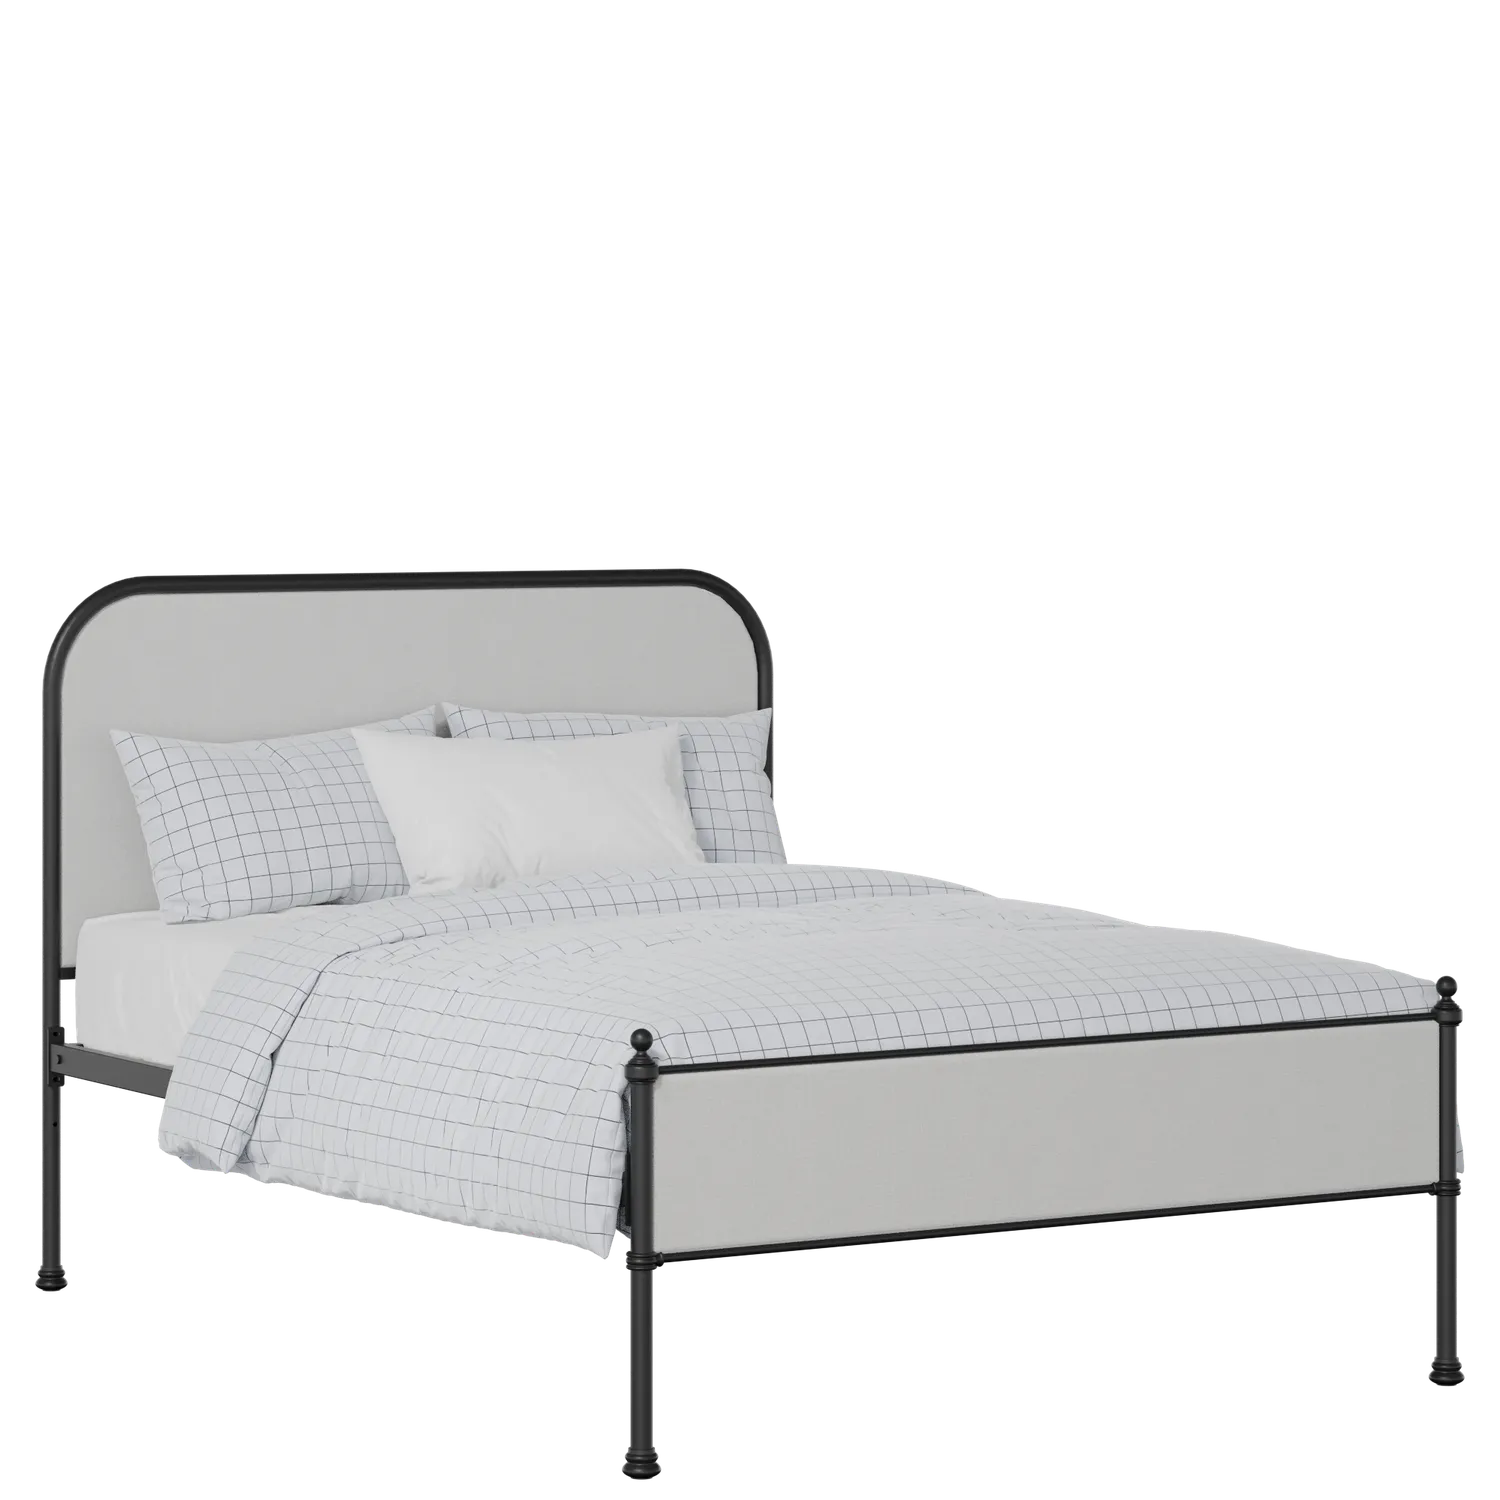 Bray Slim iron/metal upholstered bed in black with silver fabric